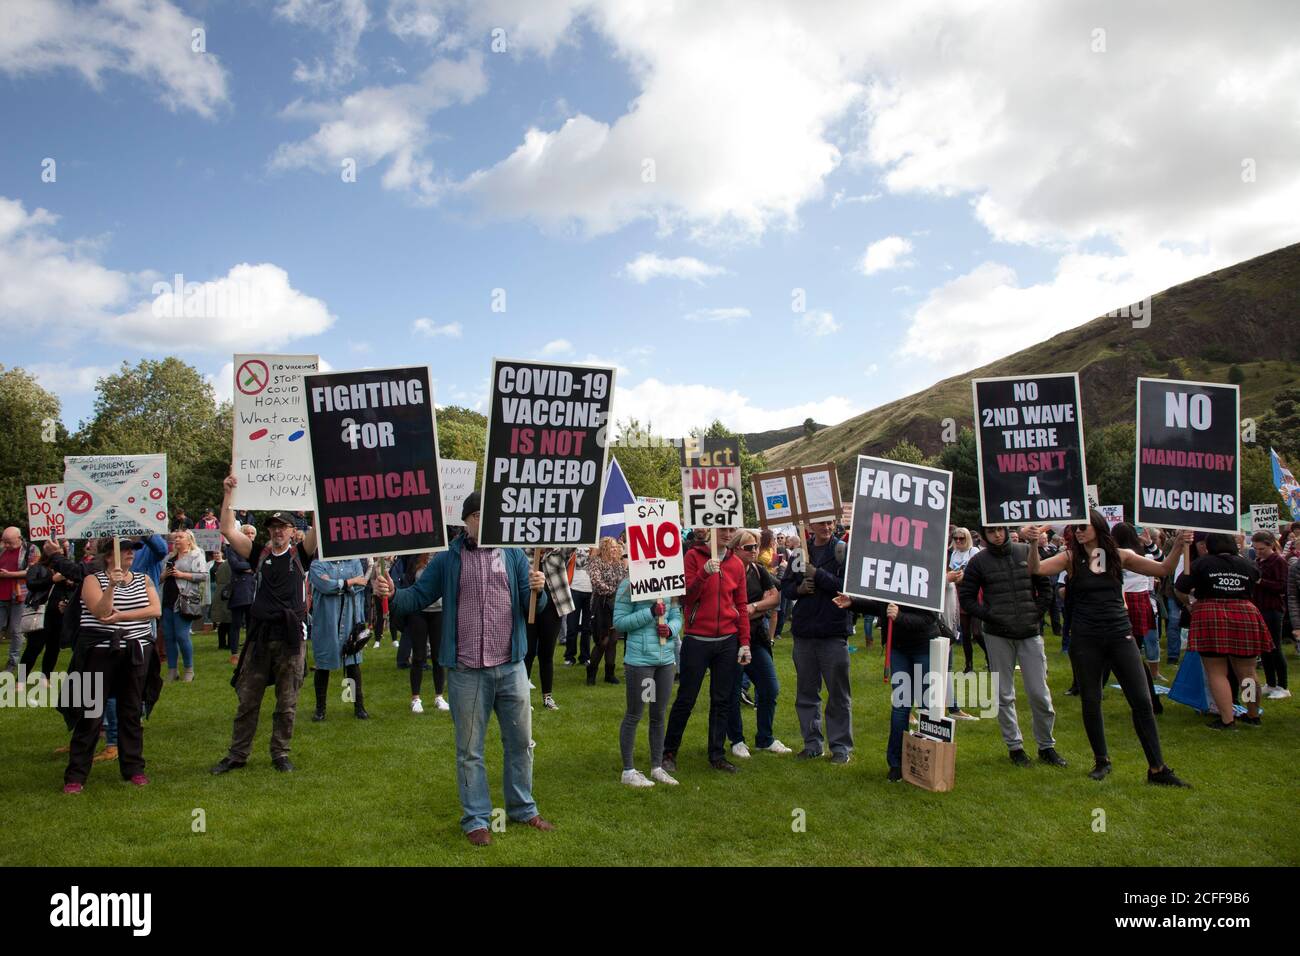 Edinburgh, Scotland, UK. 5 September 2020. 'Saving Scotland' group, anti- lockdown rally at the Scottish Parliament. Hundreds of all ages turned out for a peaceful demonstration at Holyrood. Credit: Arch White/ Alamy Live News. Stock Photo